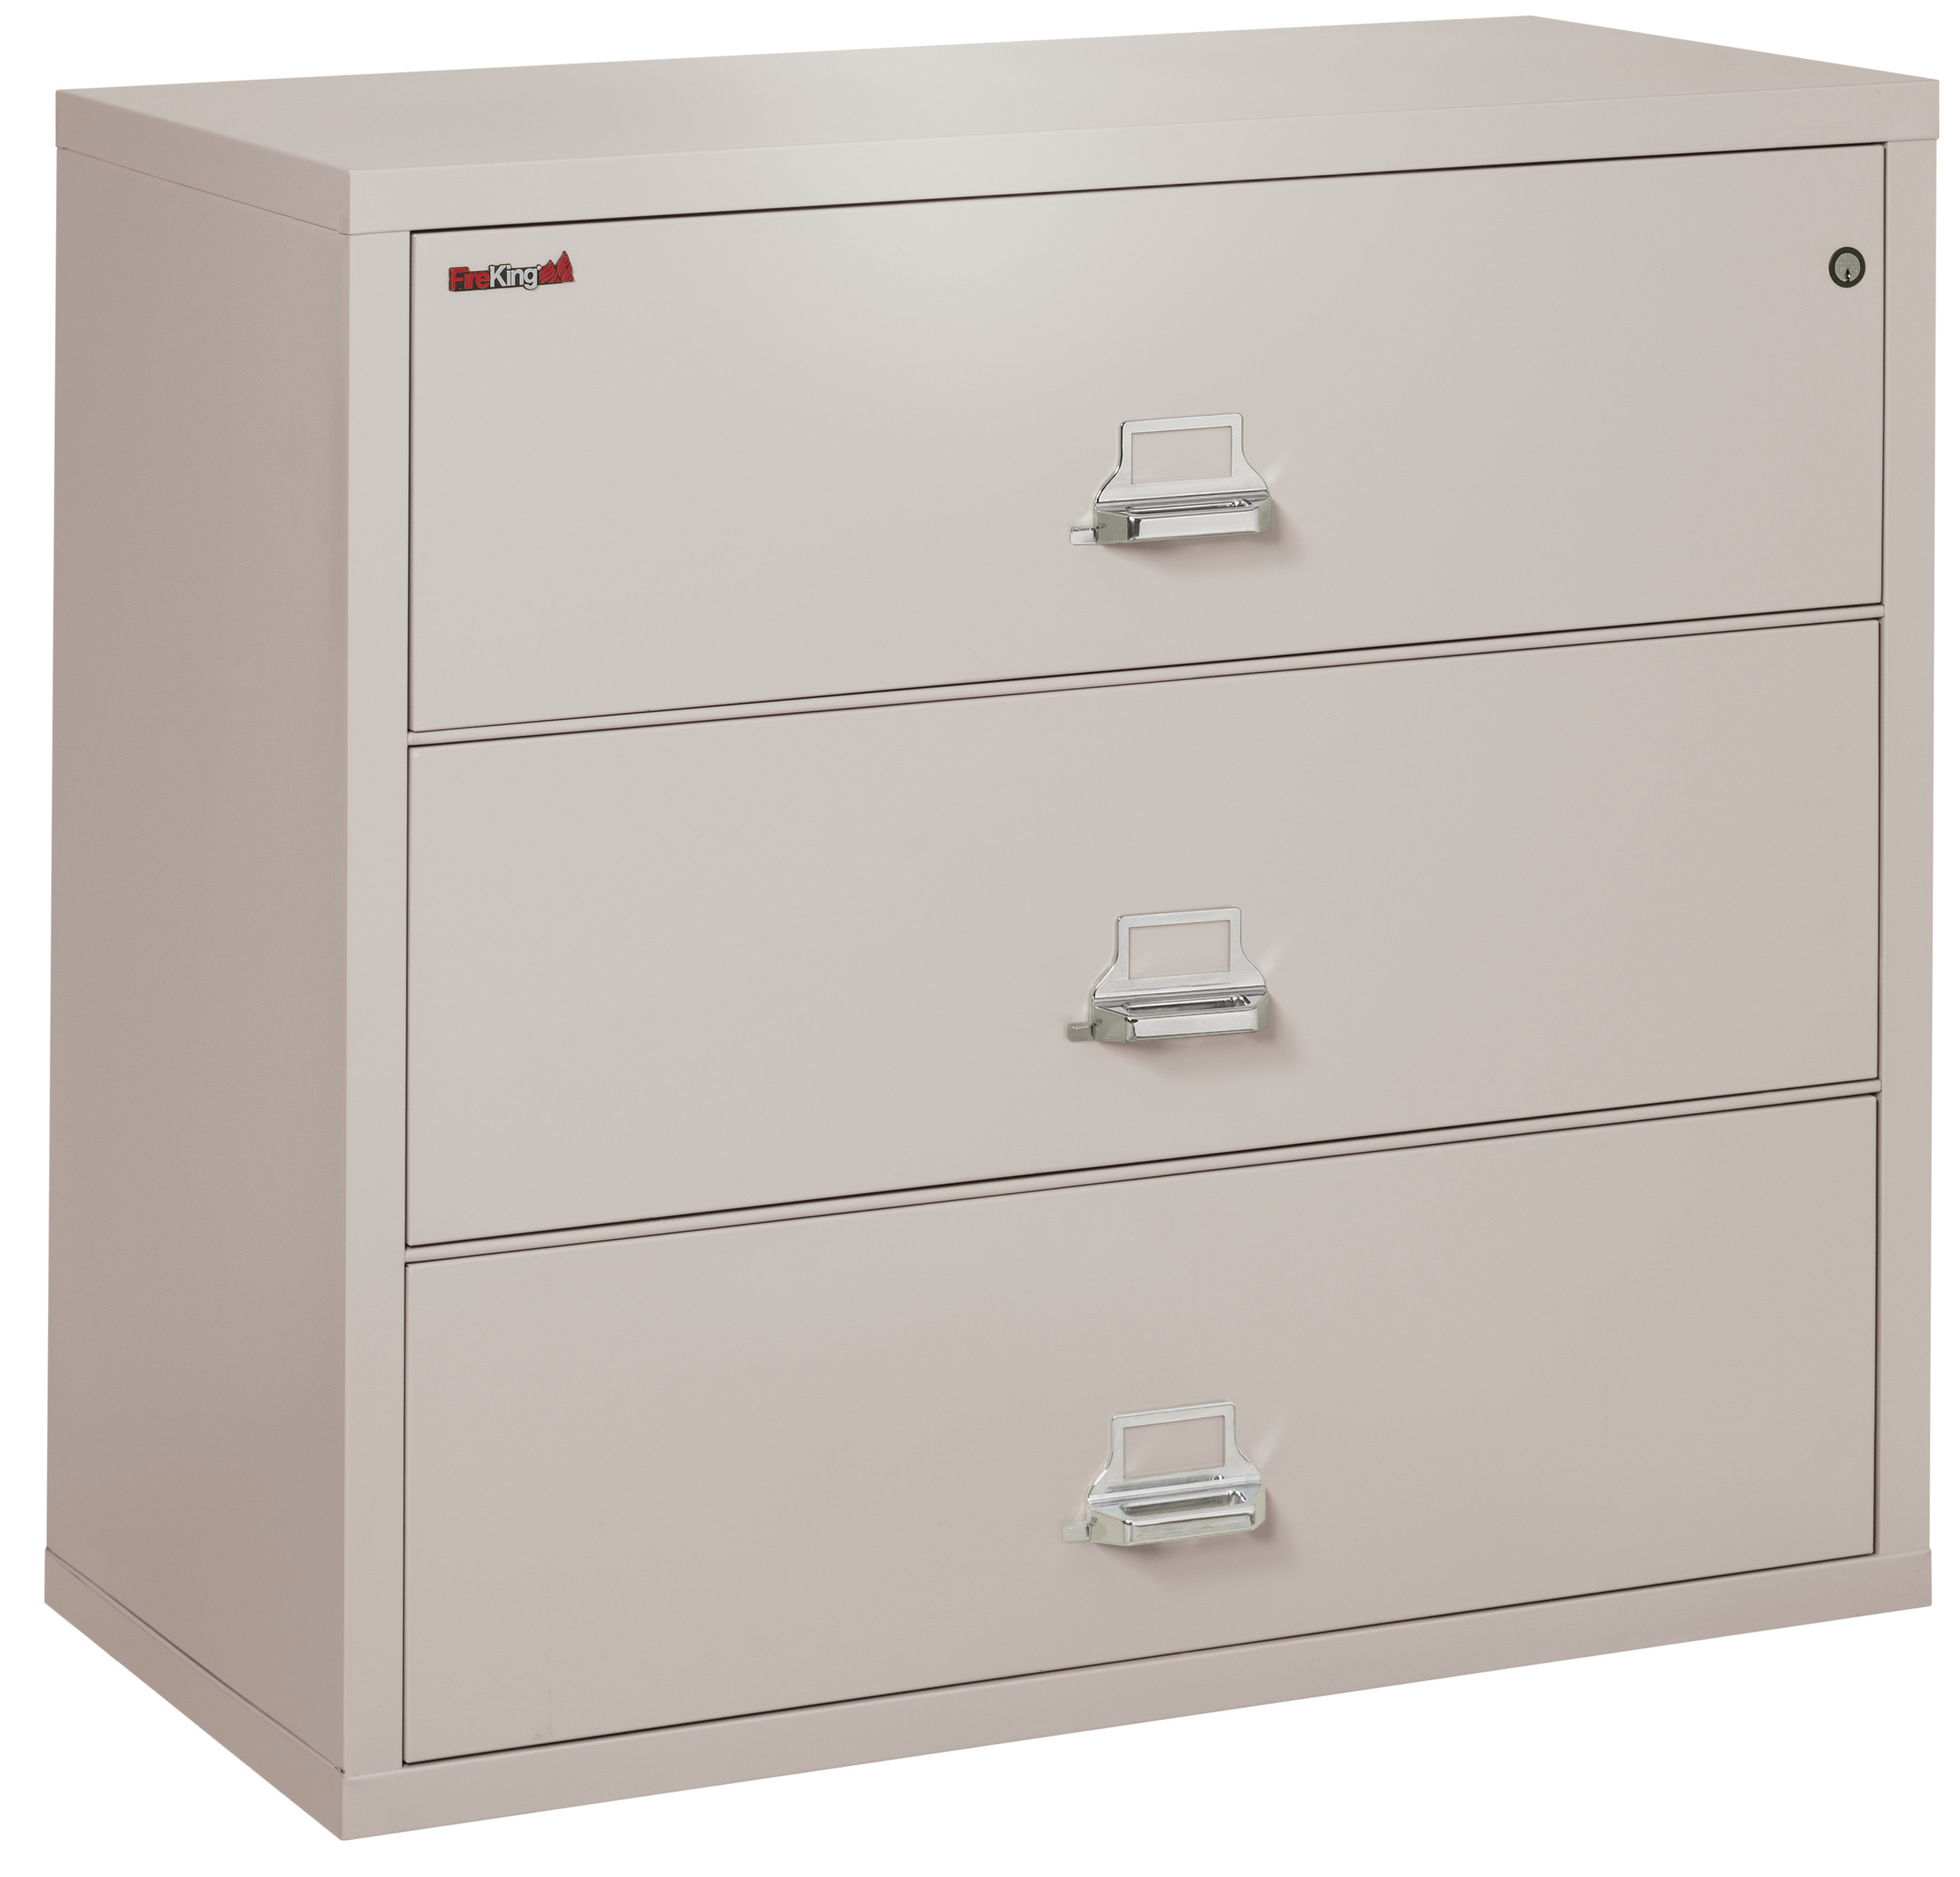 3 Drawer Lateral File Cabinet intended for size 3659 X 3504